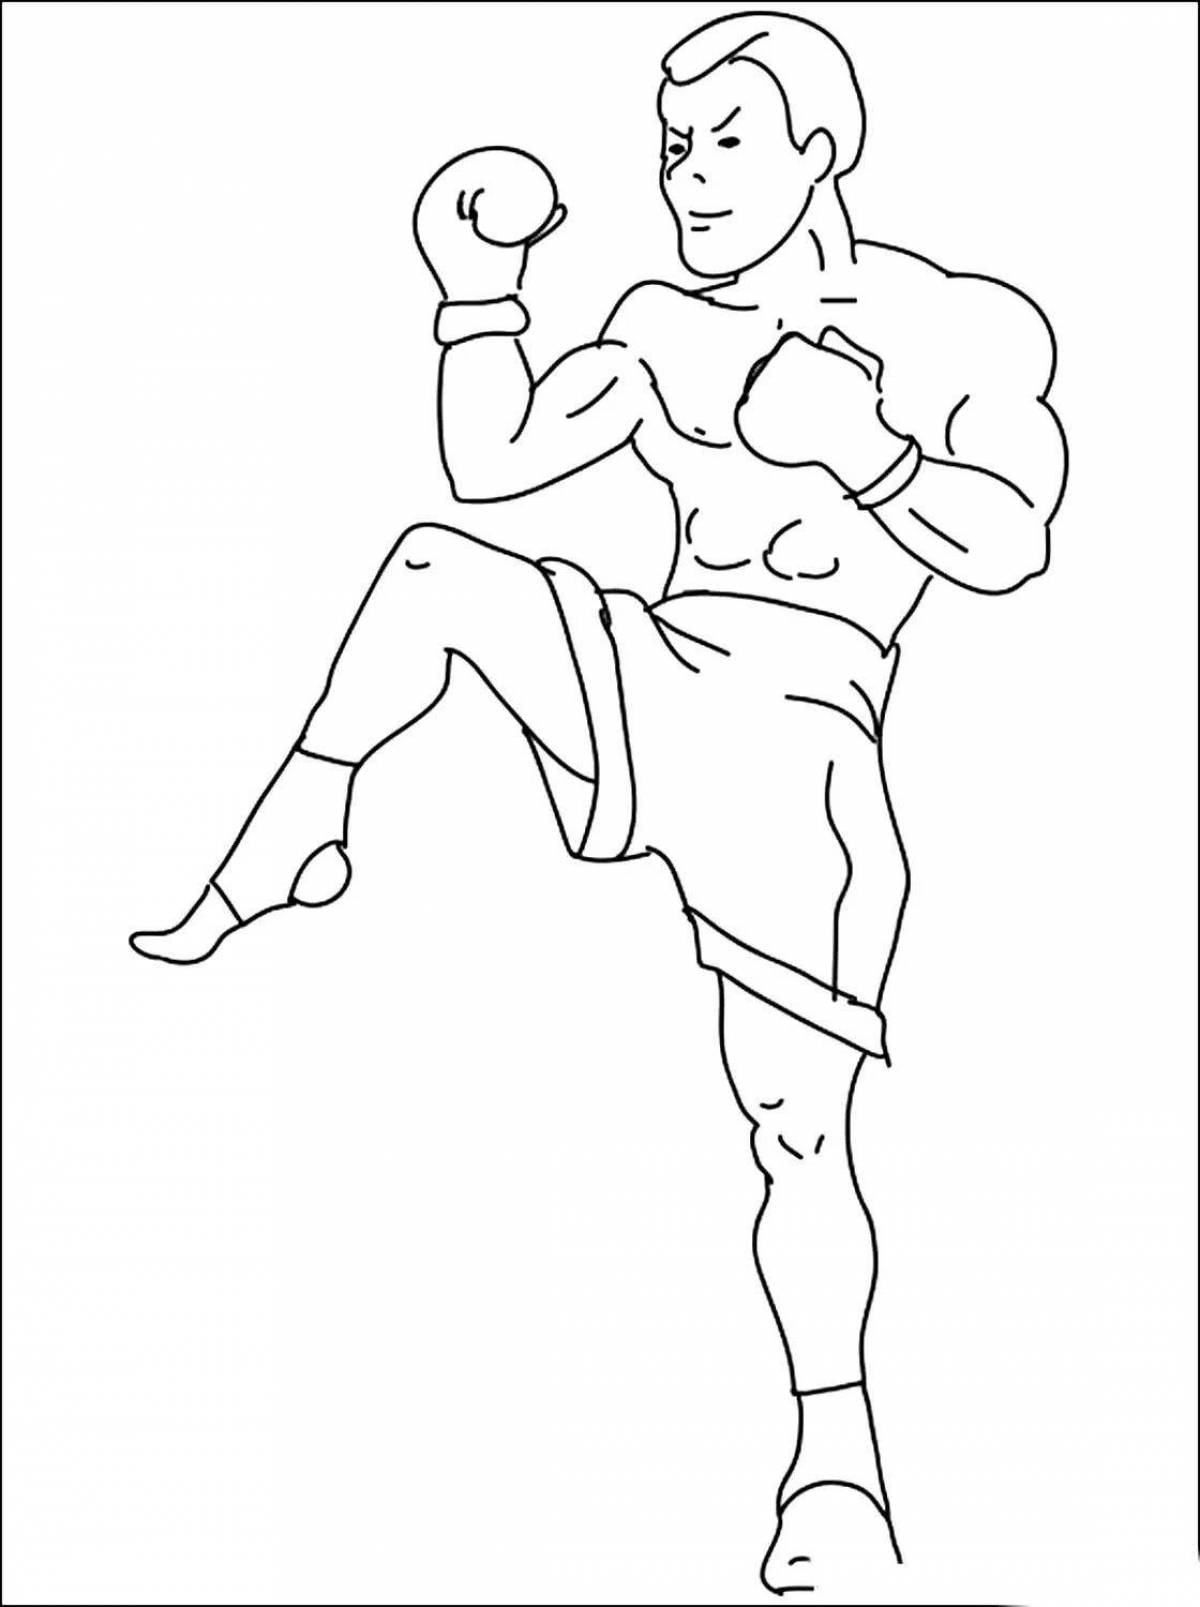 Awesome mystery boxing coloring page